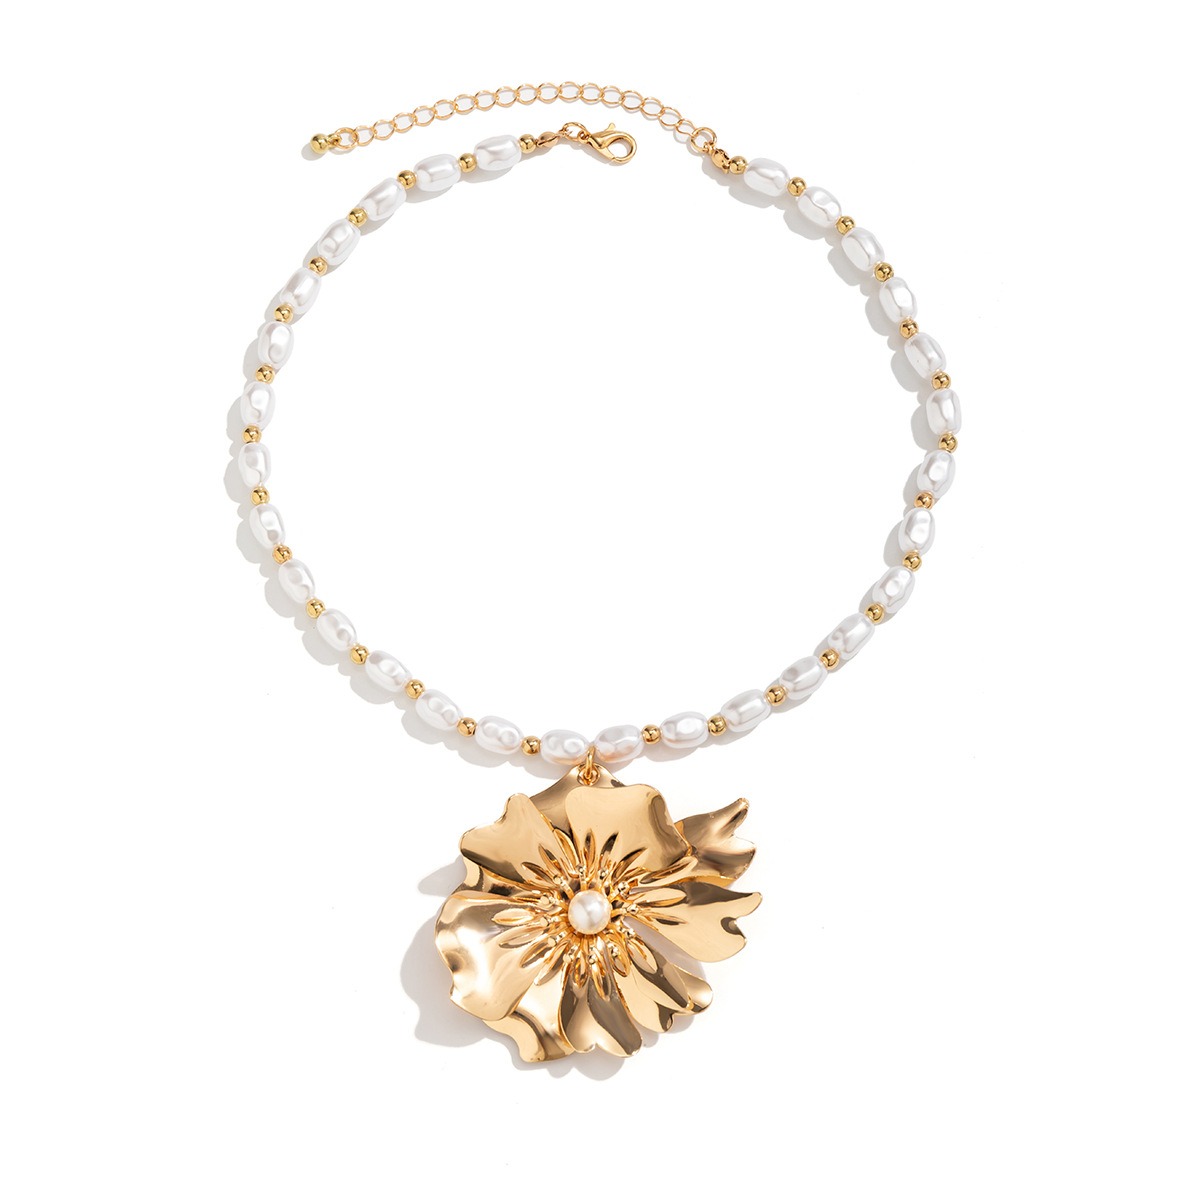 Fashion metal large flower necklace necklace for women’s retro imitation pearl necklace